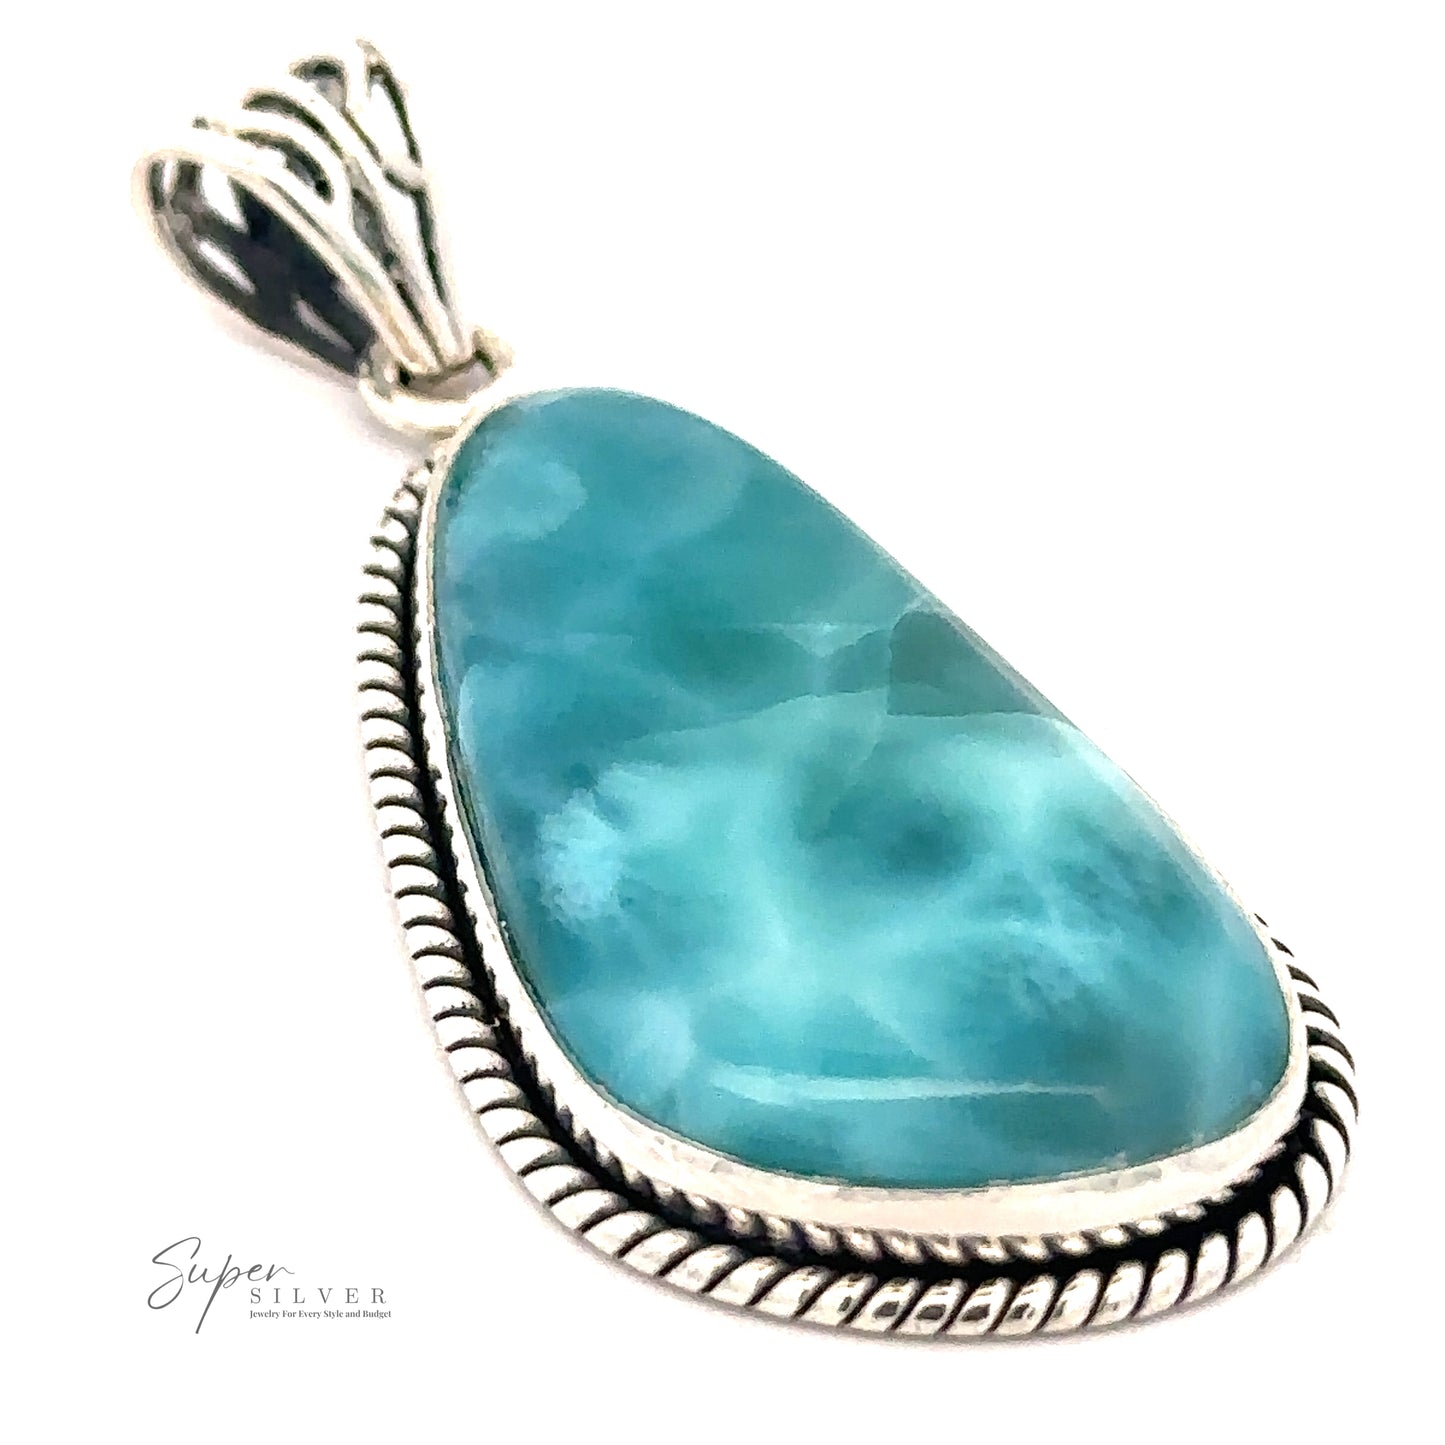 
                  
                    A sterling silver pendant featuring a large blue gemstone with a rope-style border and a decorative bail, displayed on a white background. The Super Silver brand logo is visible in the bottom left corner. This stunning Larimar Pendant with Rope Border captures attention effortlessly.
                  
                